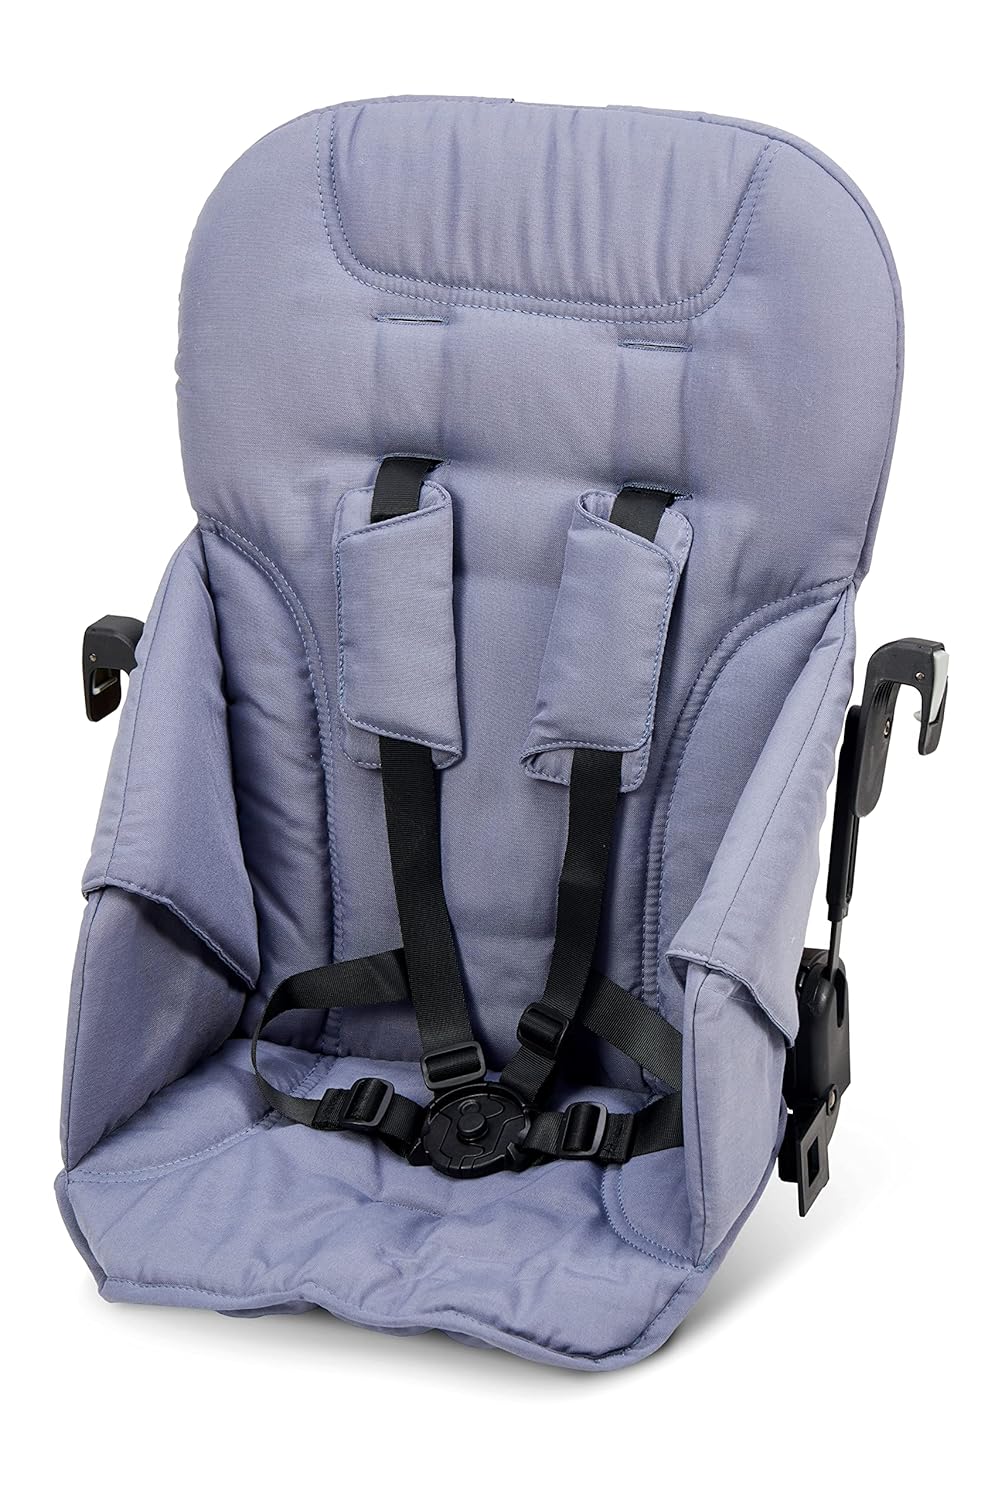 Joovy Caboose RS Rear Seat Review